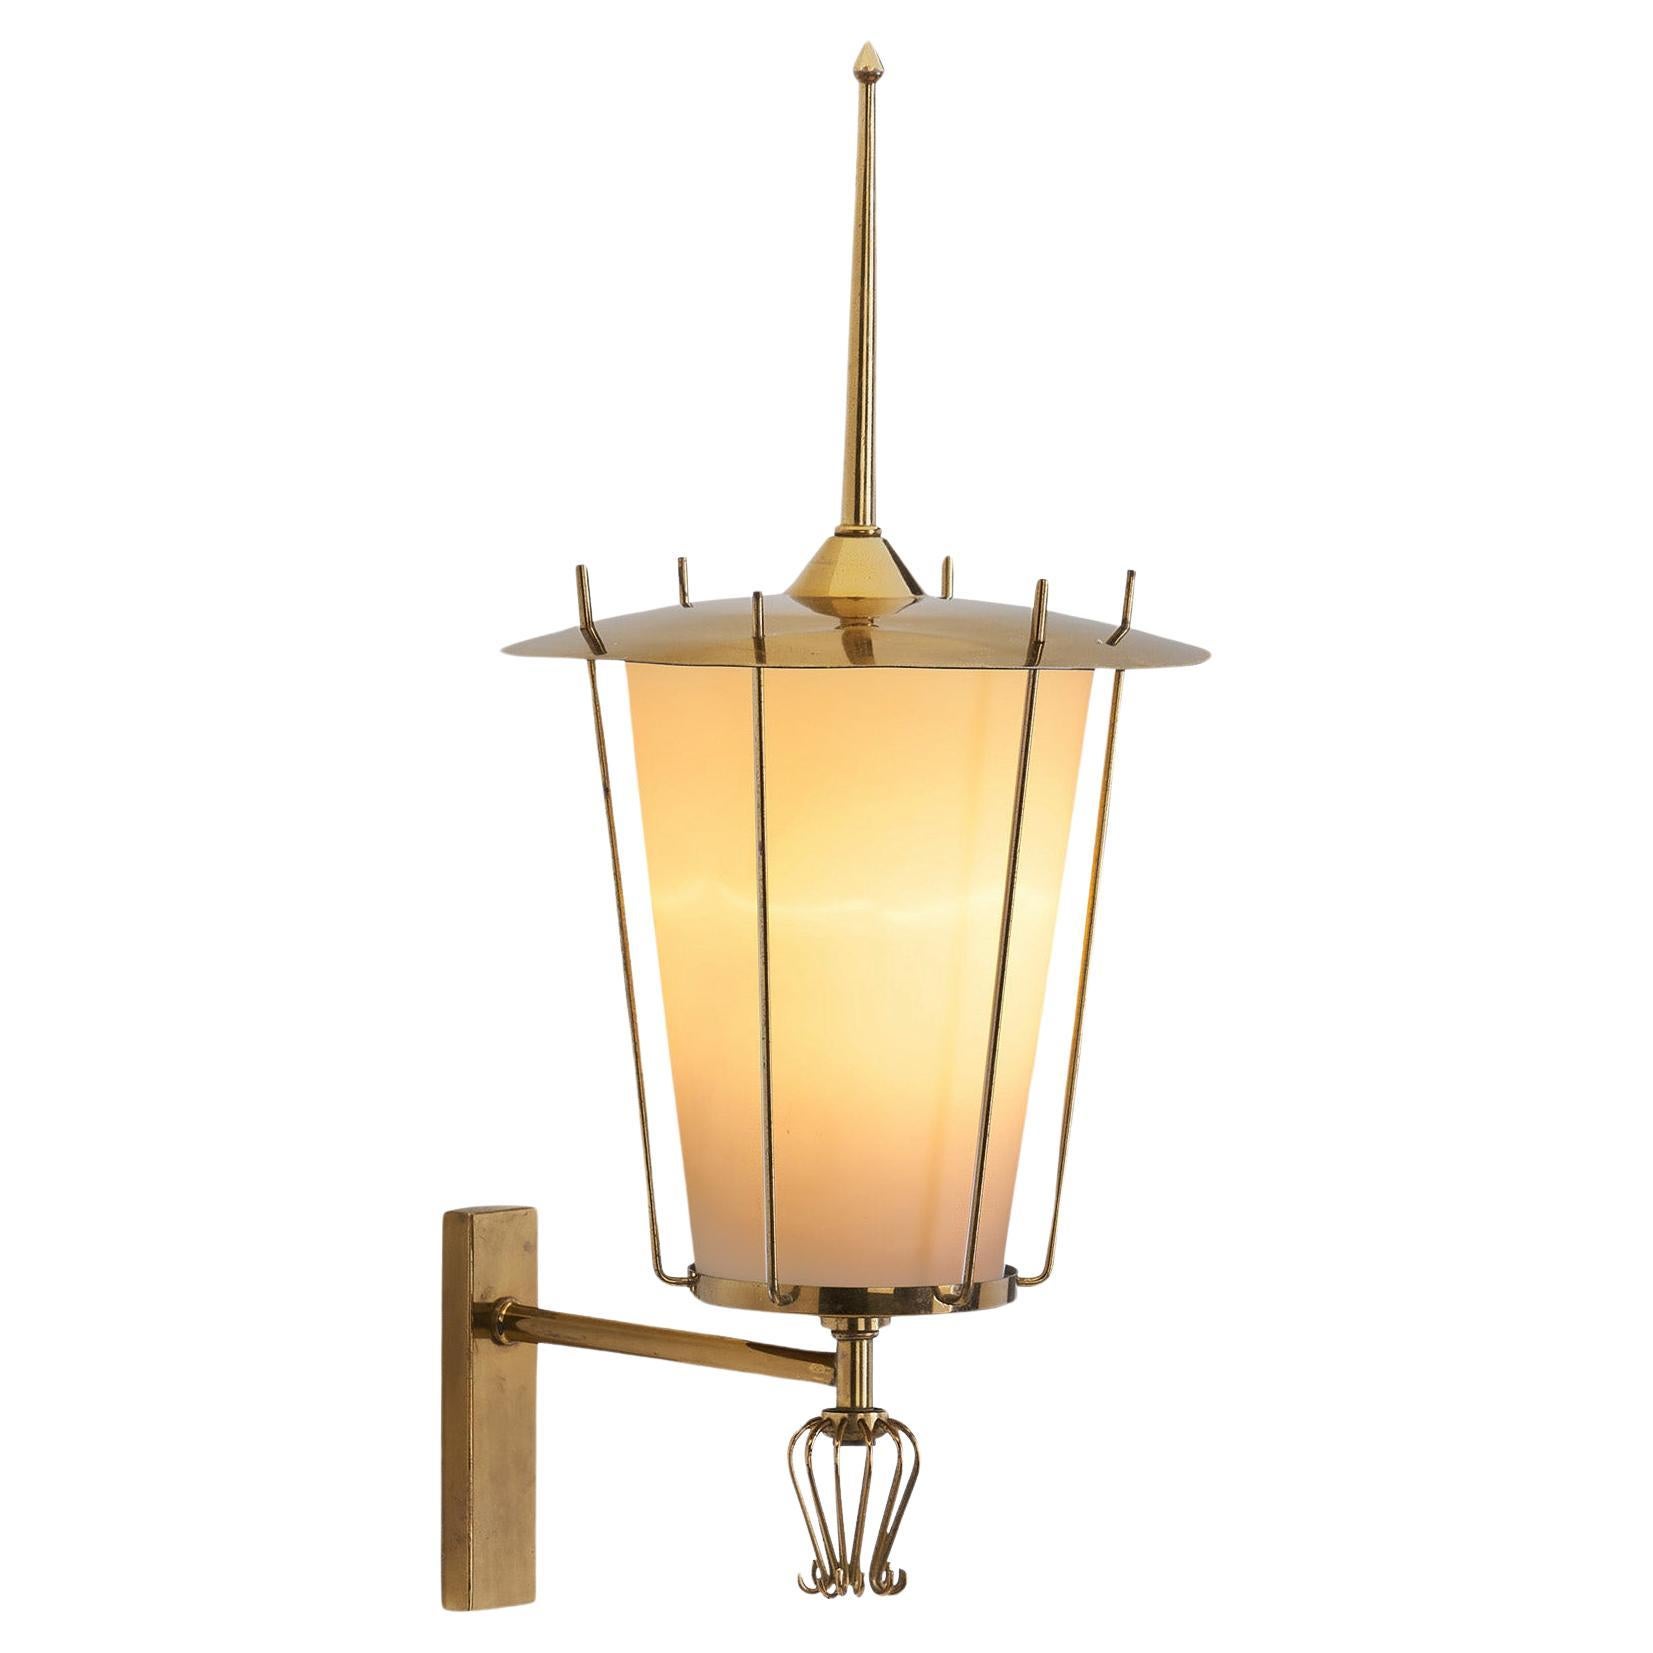 Swedish Grace Brass and Opaque Glass Wall Lamp, Sweden 1930s For Sale